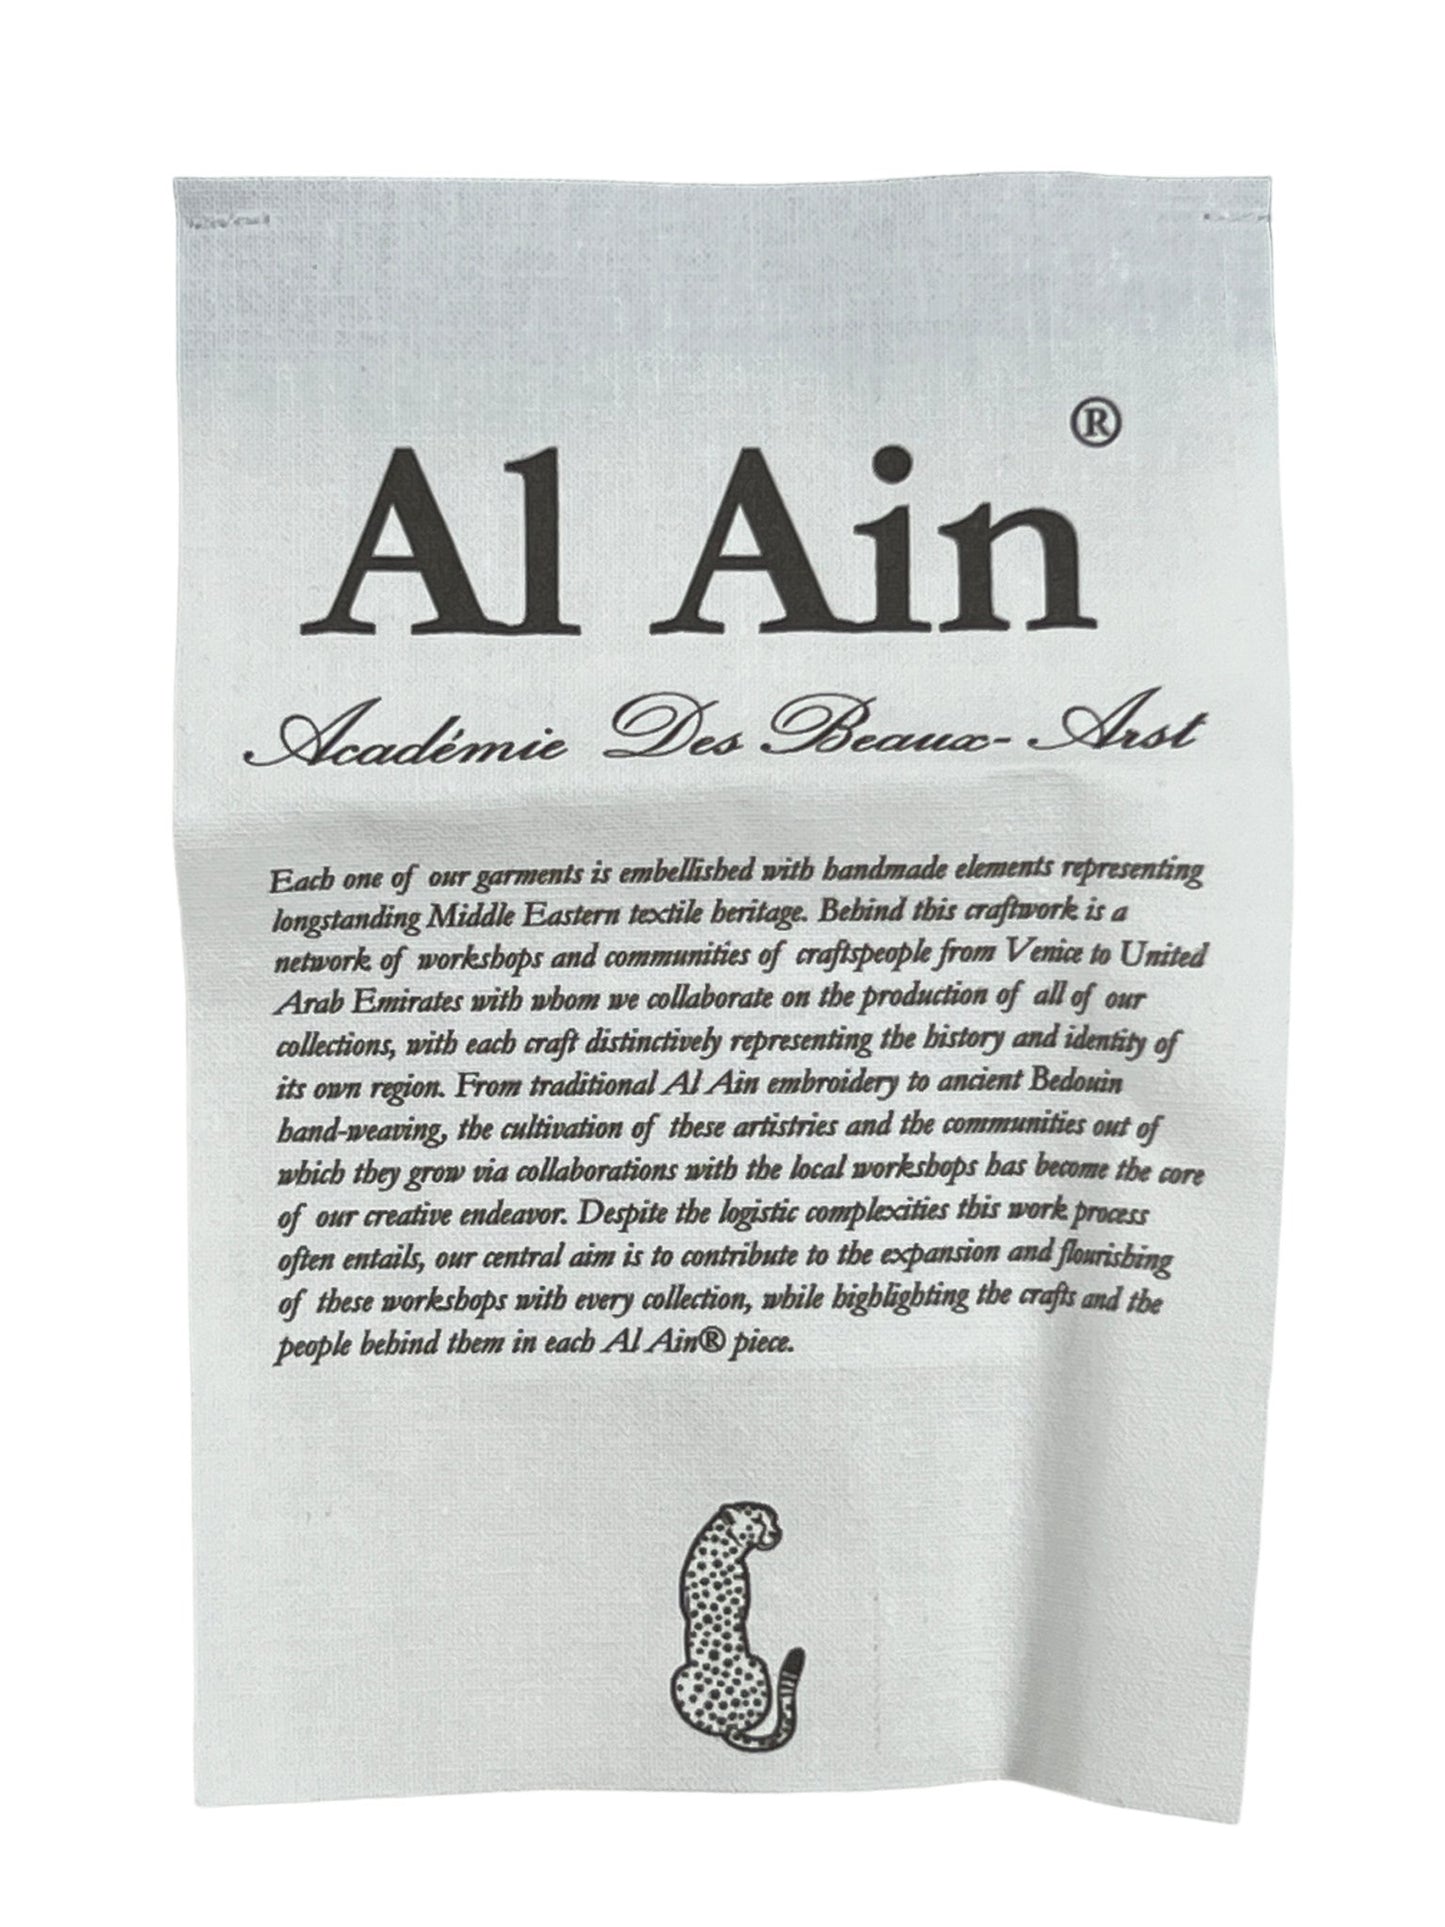 Cloth label for "AL AIN AMHX S124 CHILL NOIR" with cursive text detailing their use of handmade adornments and traditional Middle Eastern textiles, mentioning collaboration in Venice for craftsmanship. A stylish and eye-catching leopard illustration is at the bottom, perfect for an embroidered brand or graphic t-shirt.